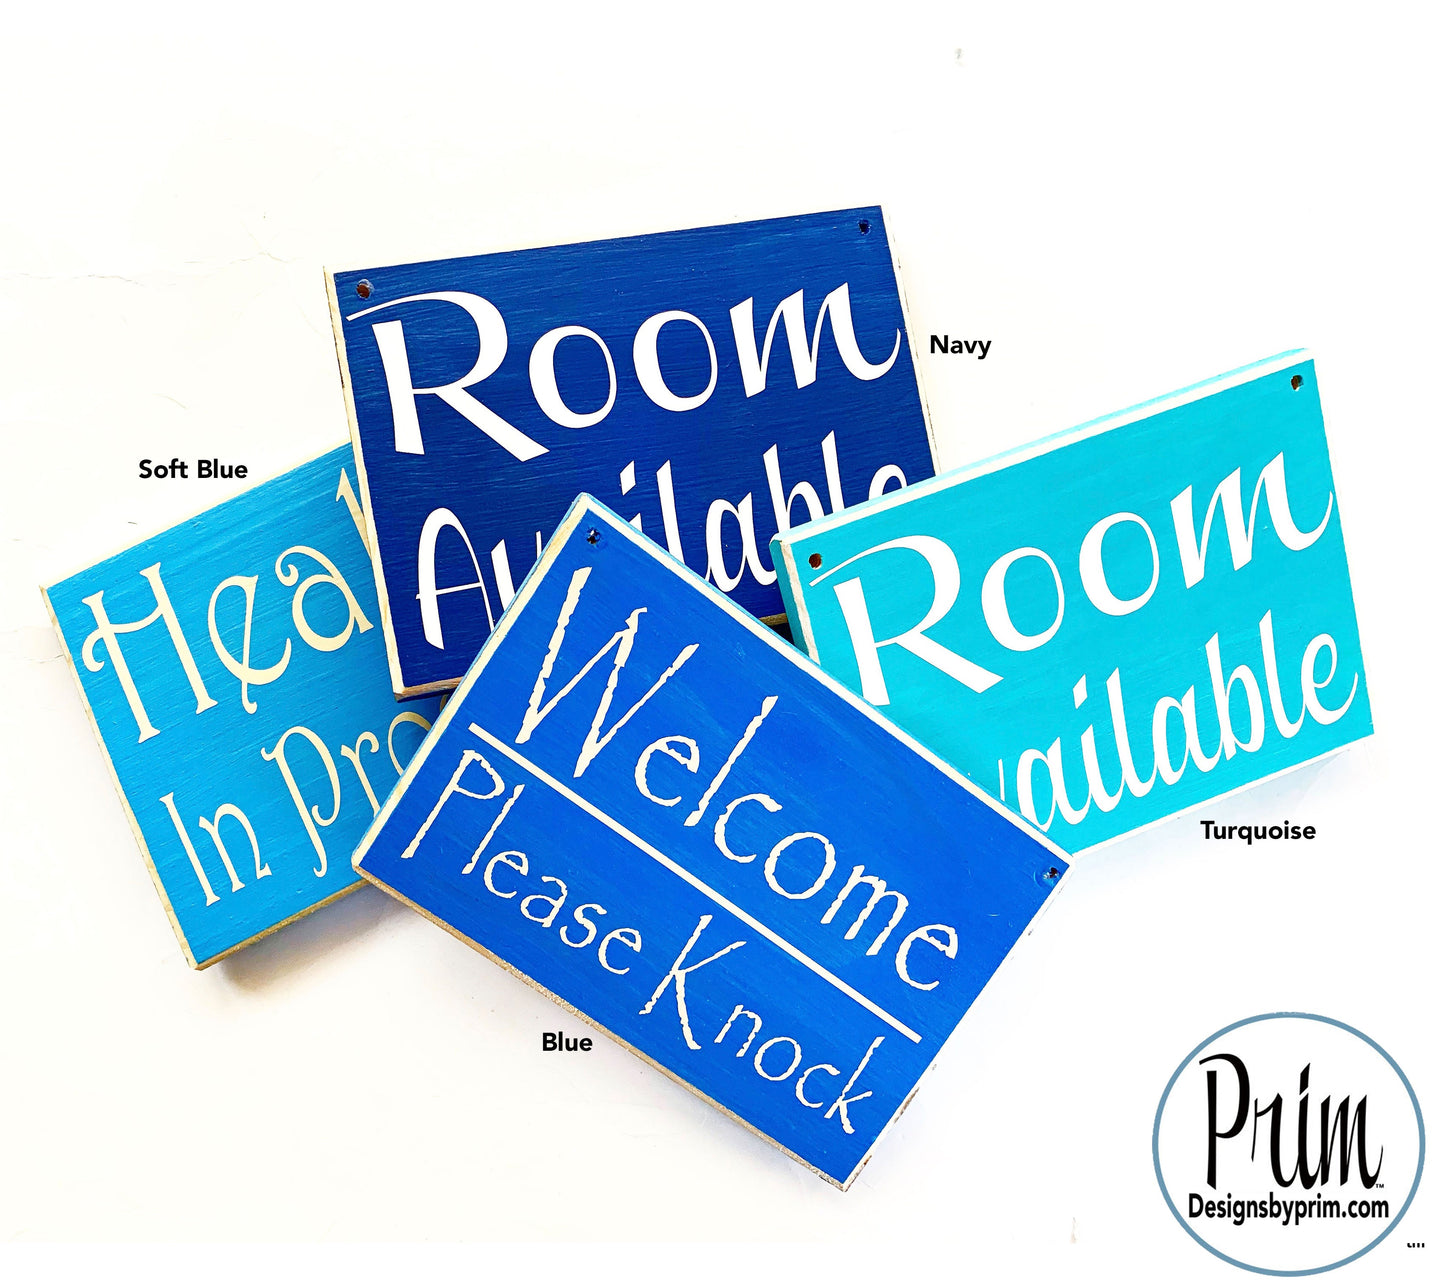 Designs by Prim 8x6 Elevation In Progress Welcome Session Do Not Disturb Spa Salon Two Sided Custom Wood Sign Welcome Home Office Door Hanger Plaque